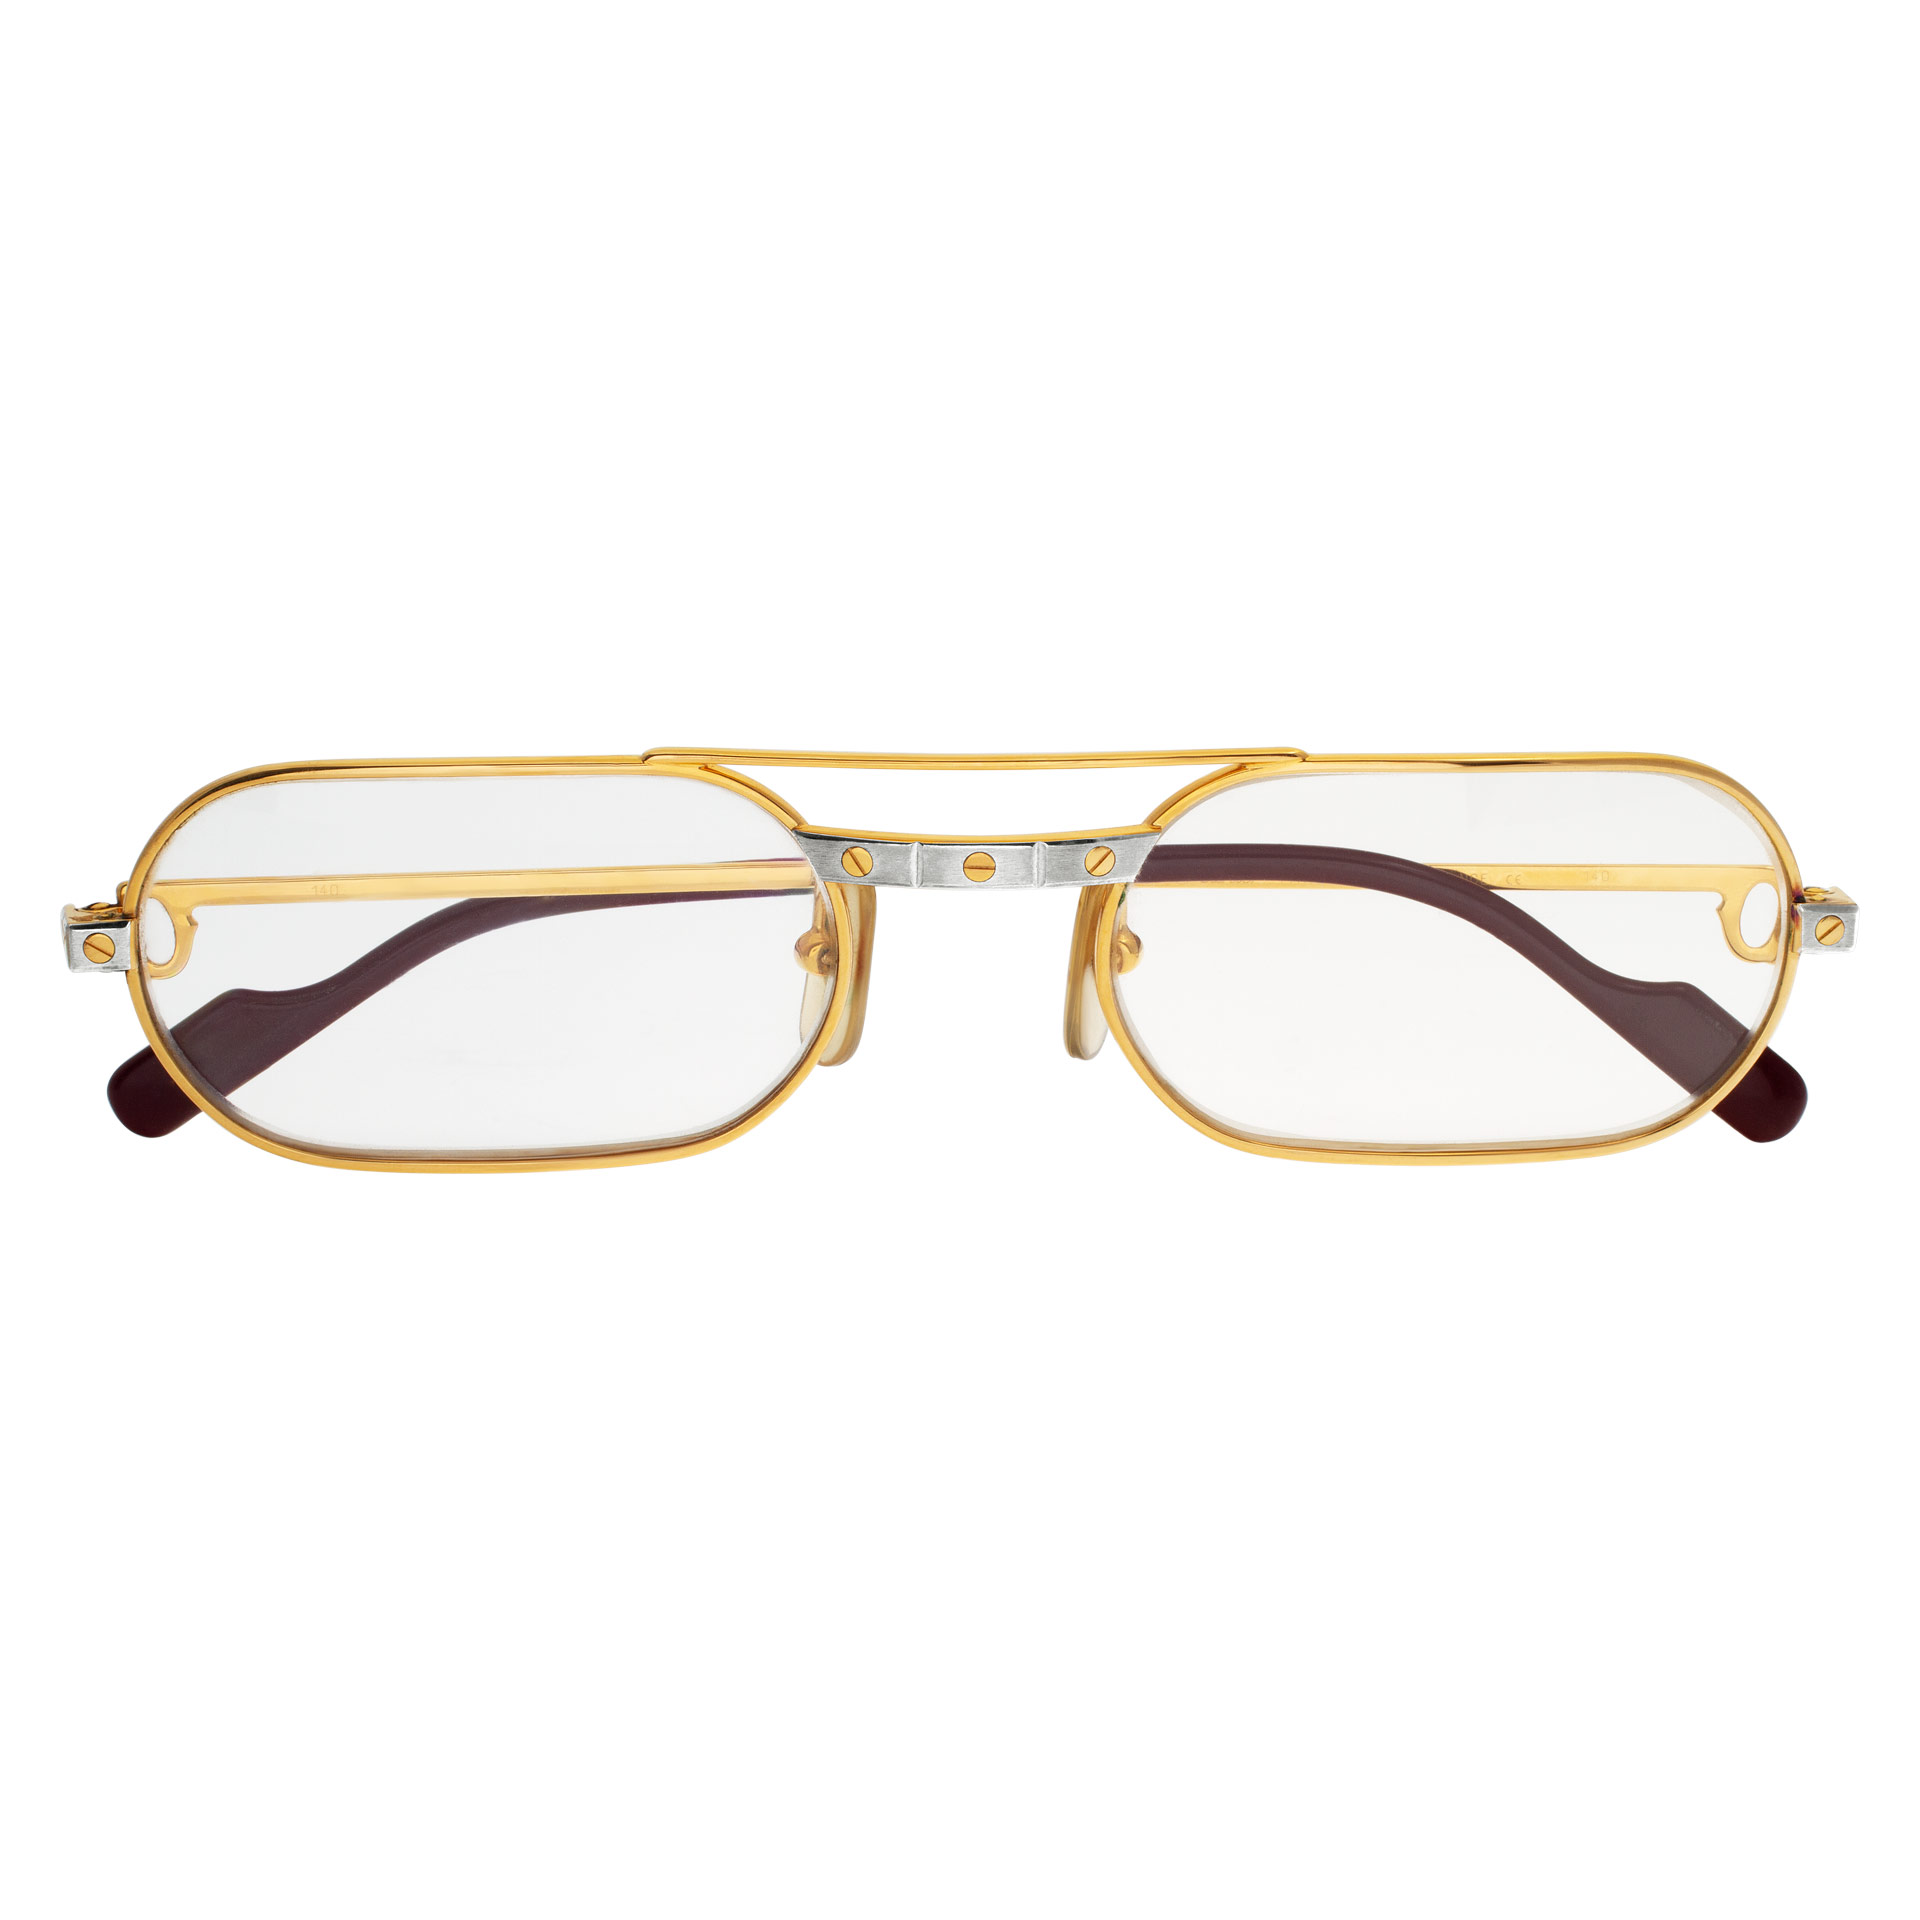 Cartier Santos glasses gold plated image 1